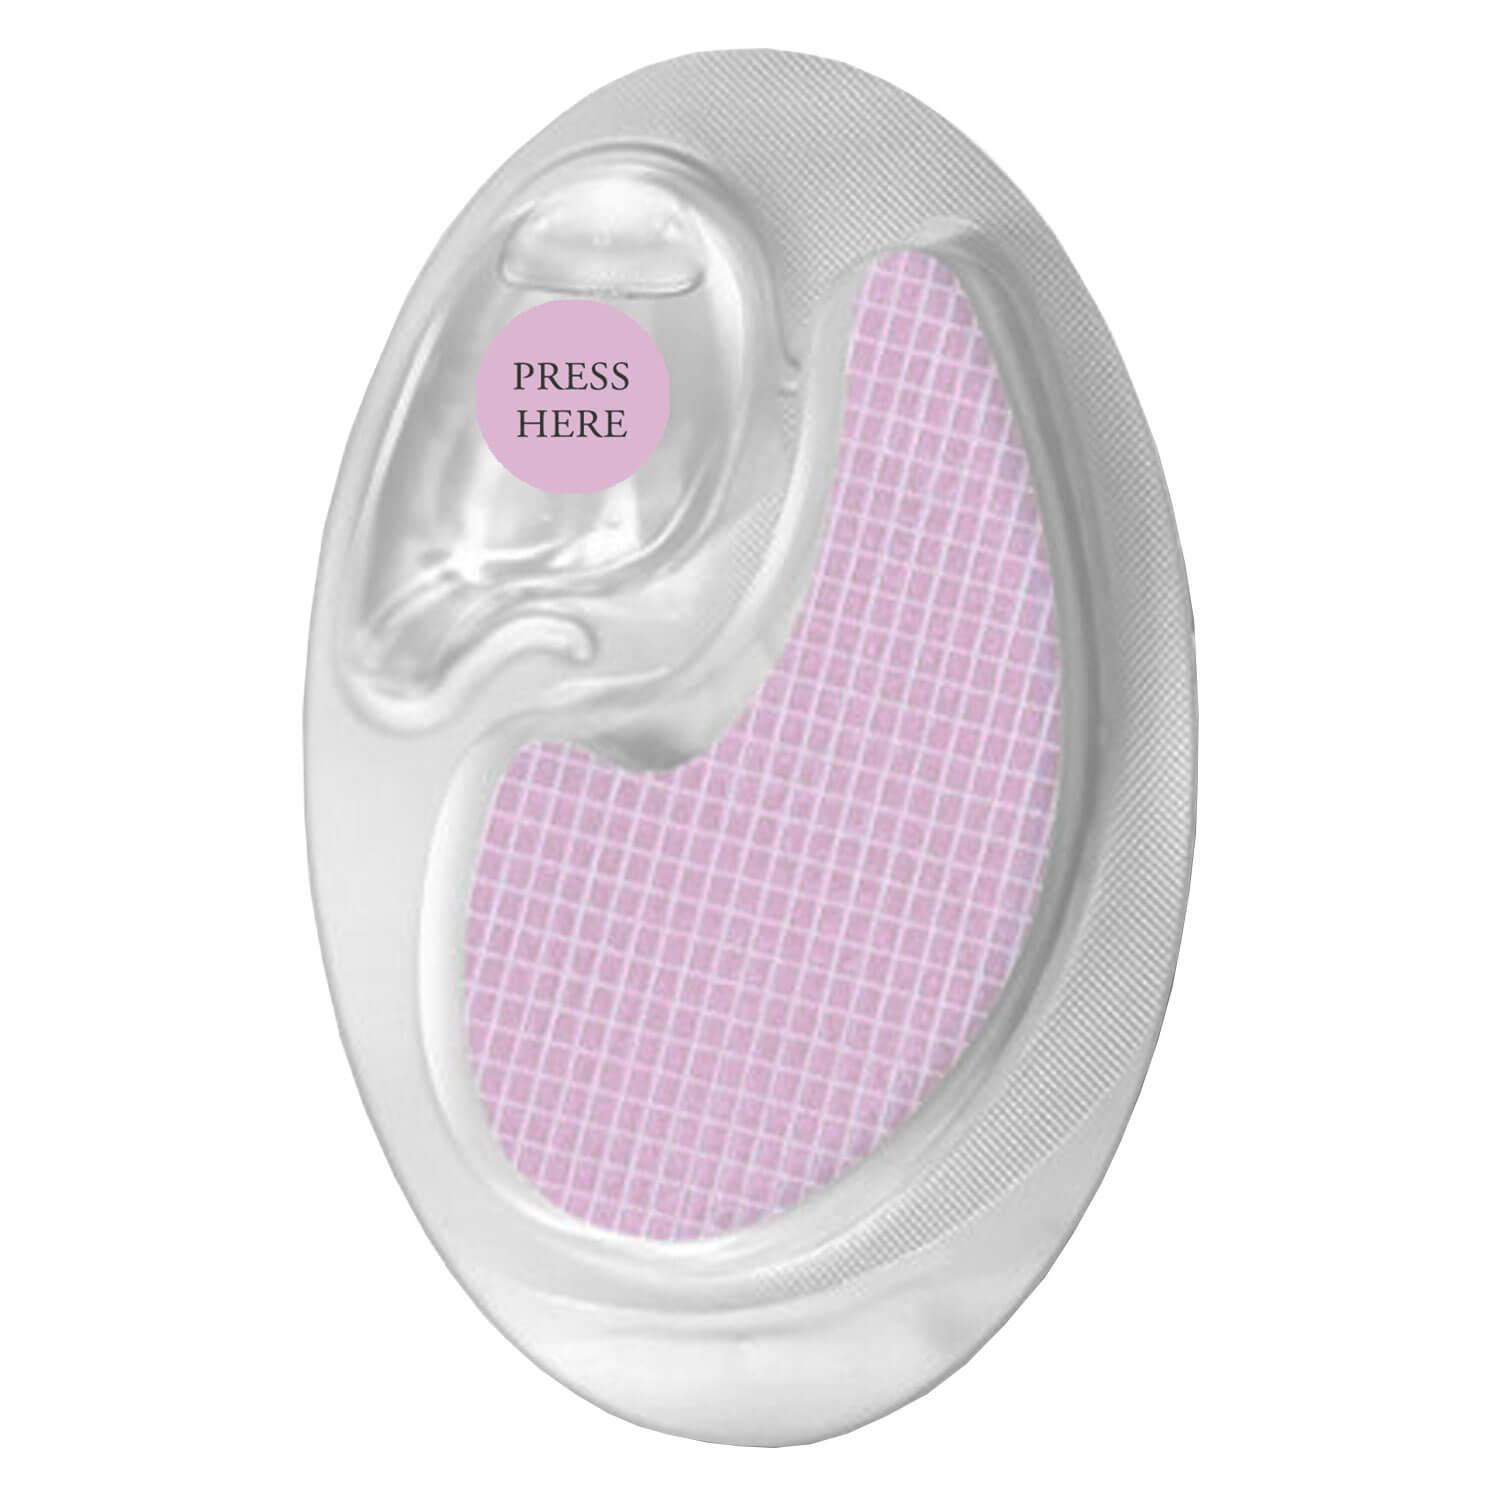 Cellpower Experts - The VitalCell Eye Contour Pads